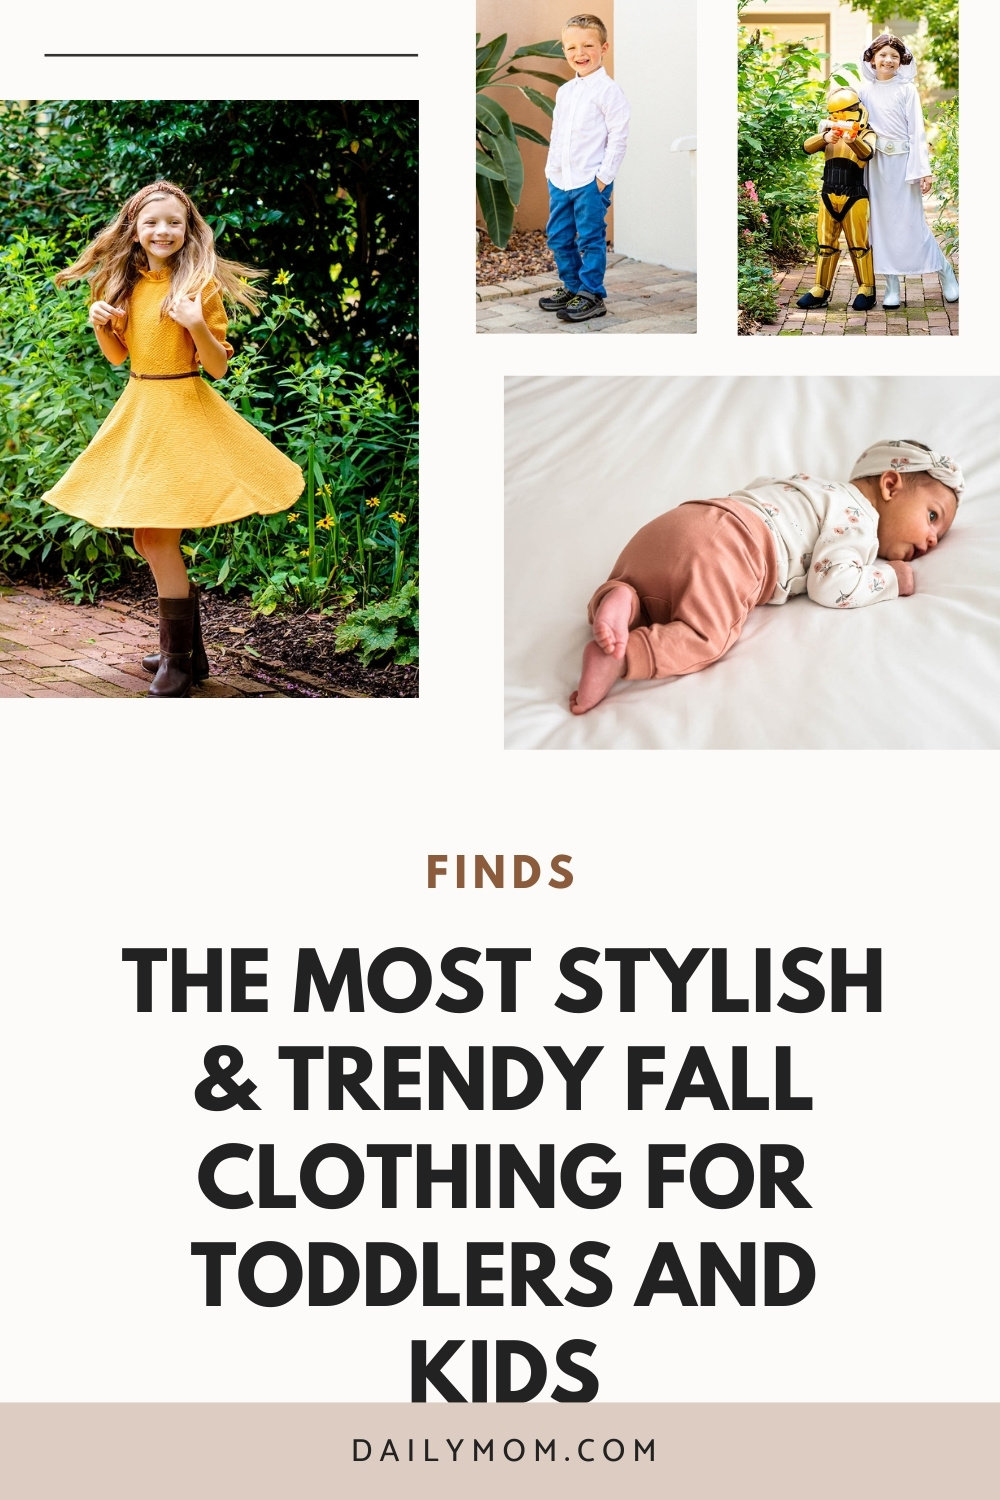 Fall Clothing For Toddlers And Kids: 13 Stylish & Trendy Brands